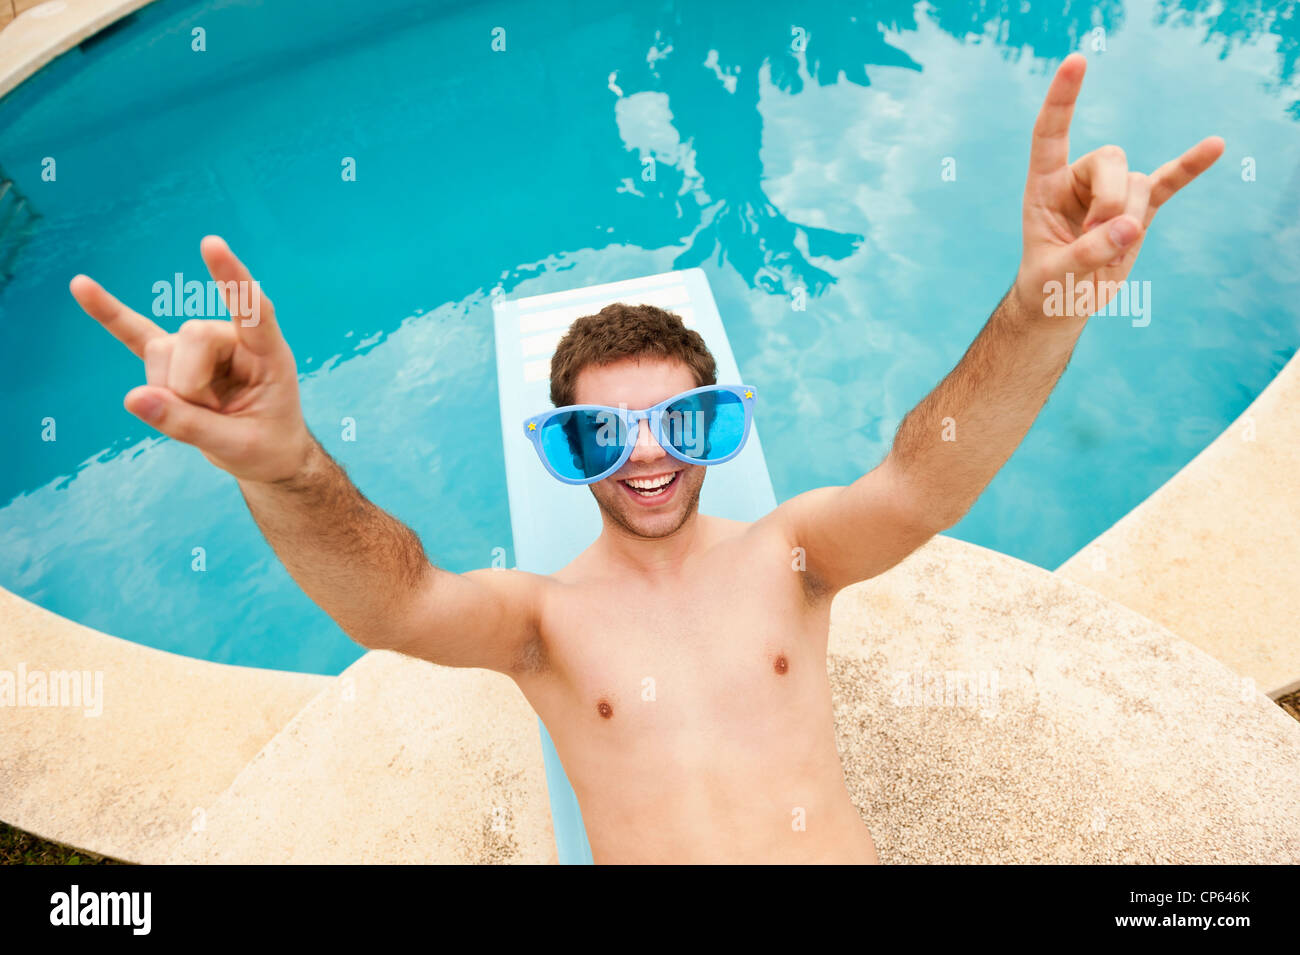 Spain, Mallorca, Young man with funny glasses on diving board, smiling Stock Photo